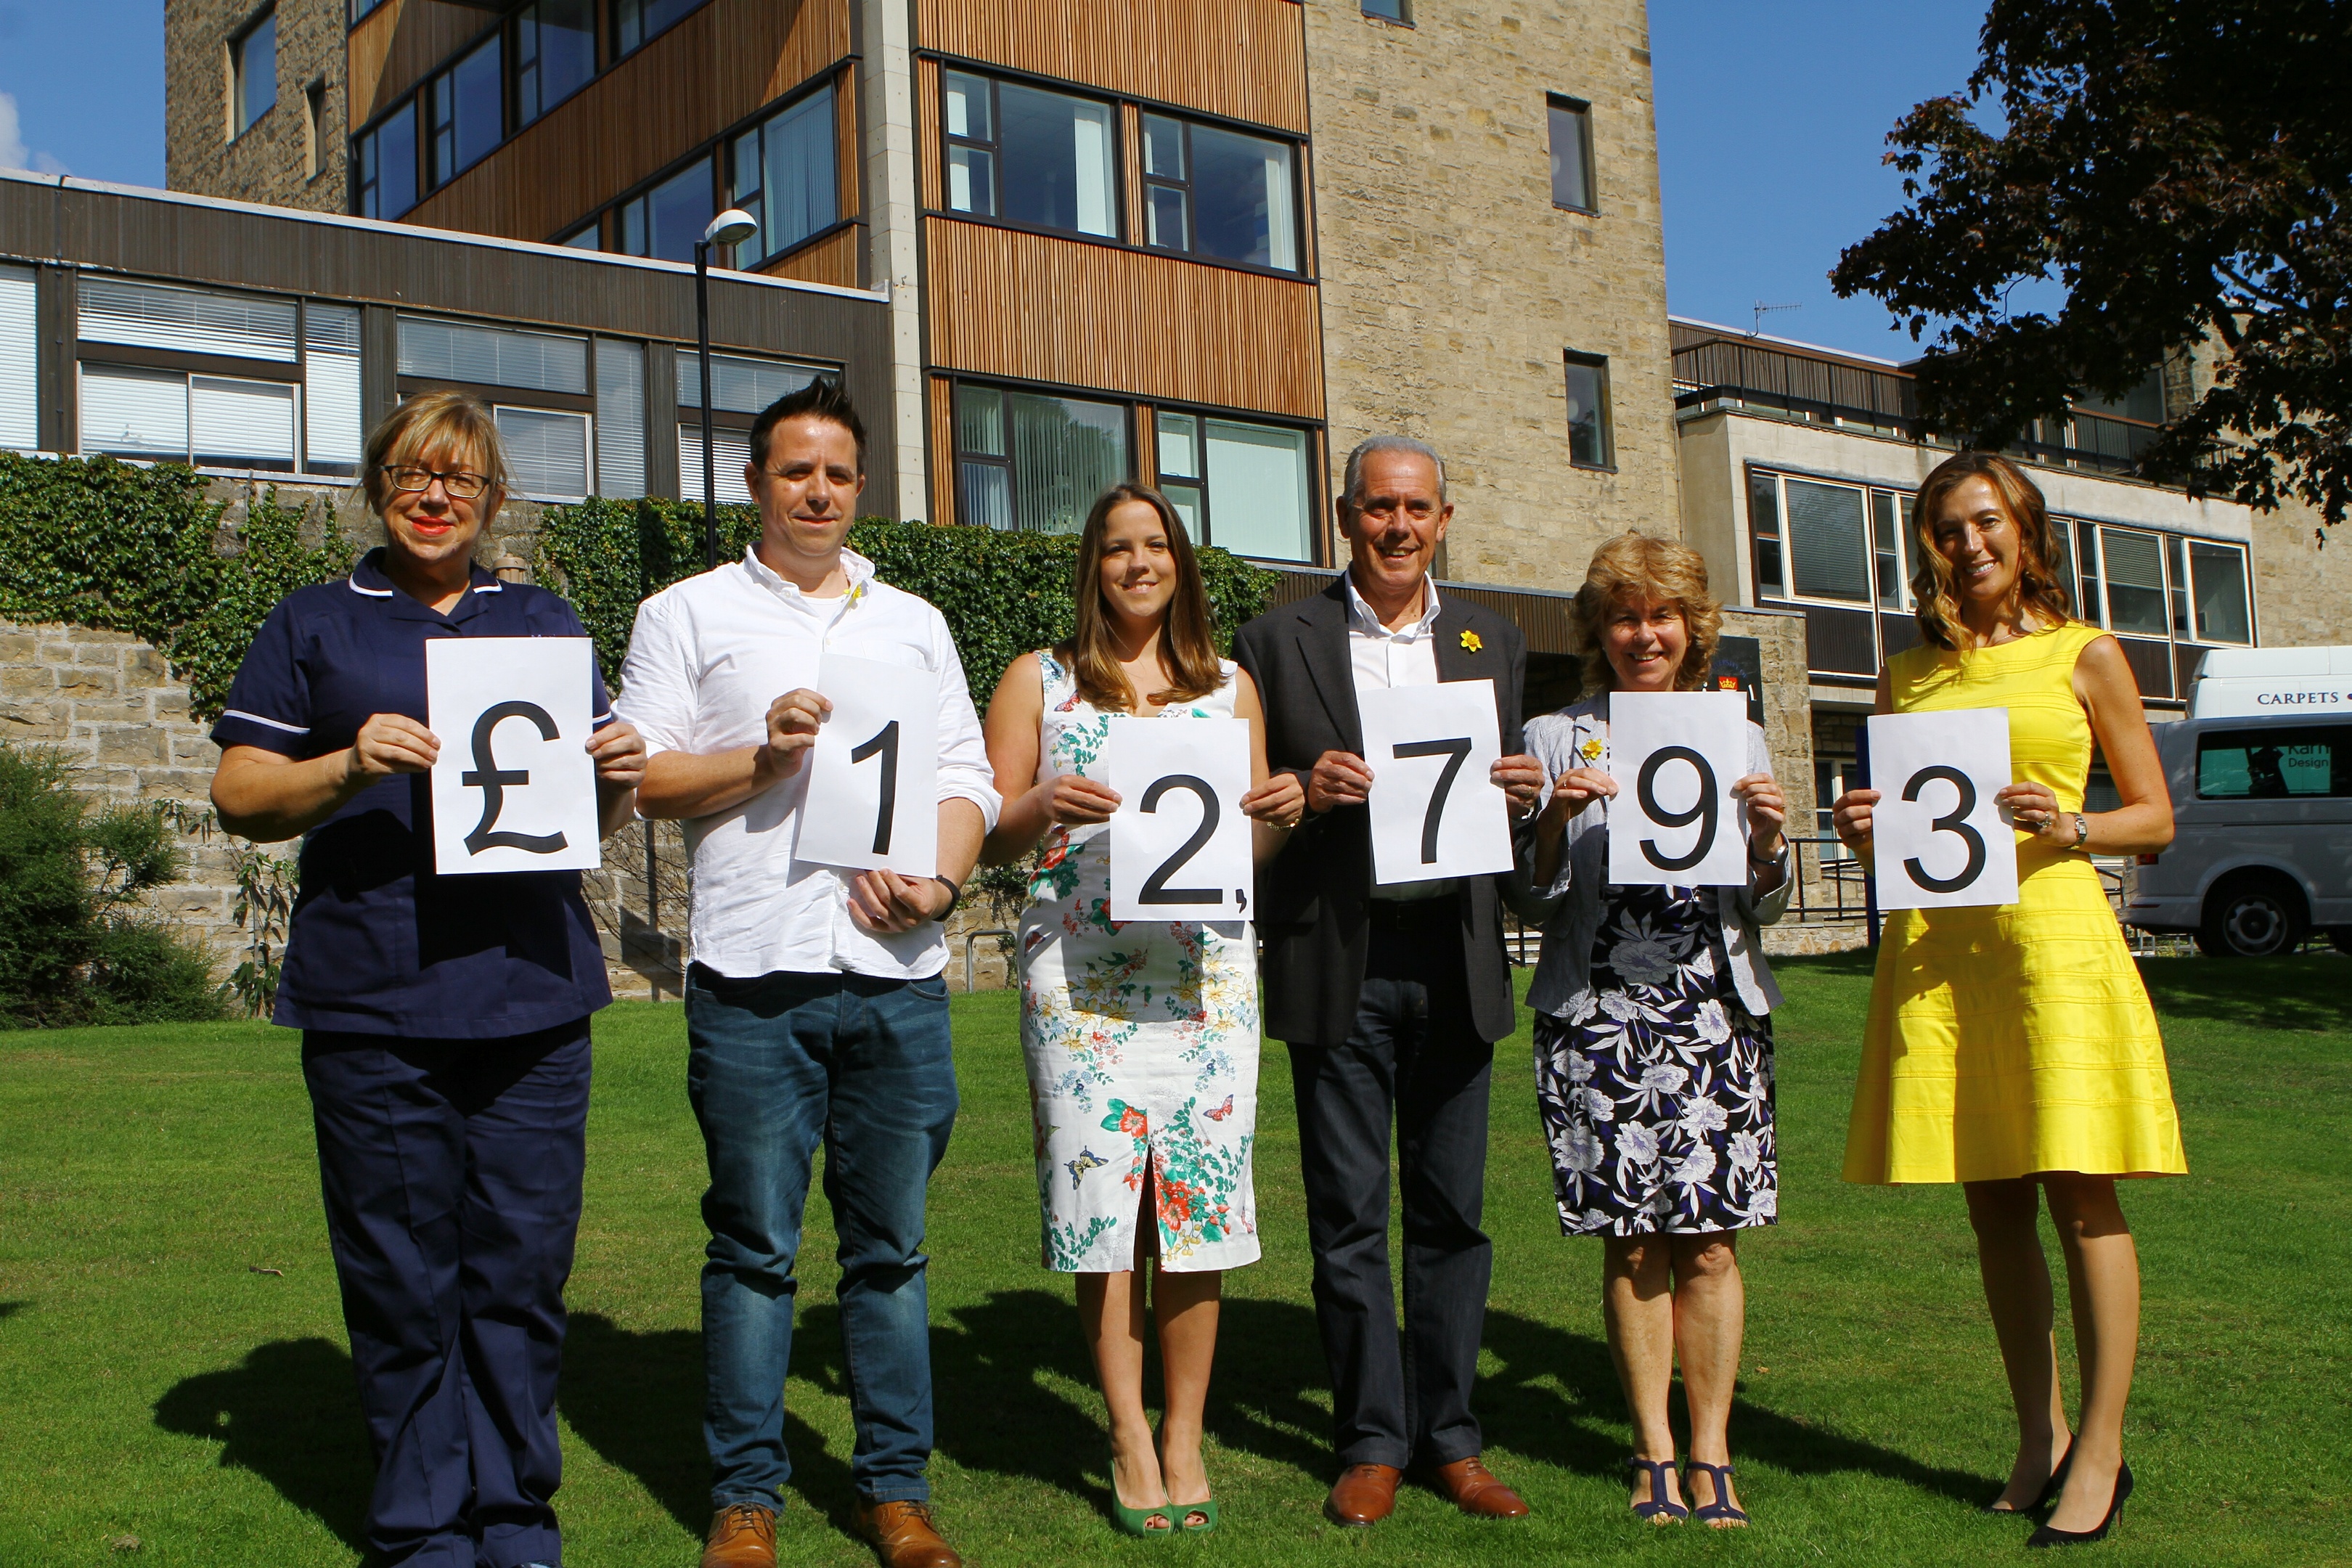 Elaine MacNicoll, Senior Marie Curie Nurse Tayside, with the Lindsay family Peter, Claire, parents Alex and Elizabeth and Marie Cure patron Petra McMillan celebrate the fundraising milestone.